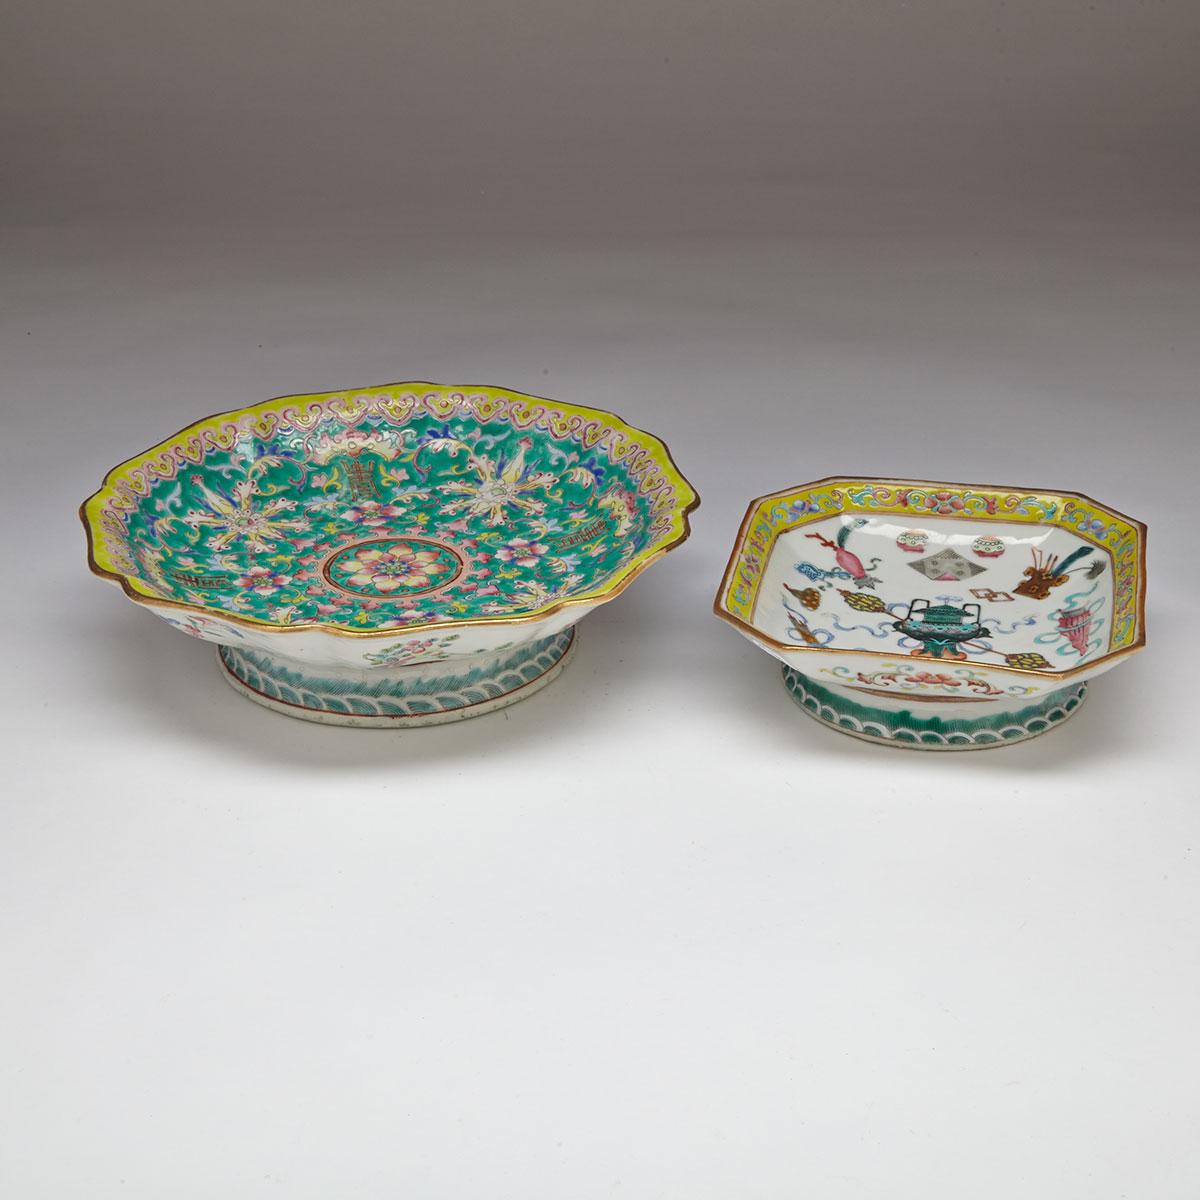 Two Famille Rose Footed Bowls, Late 19th Century